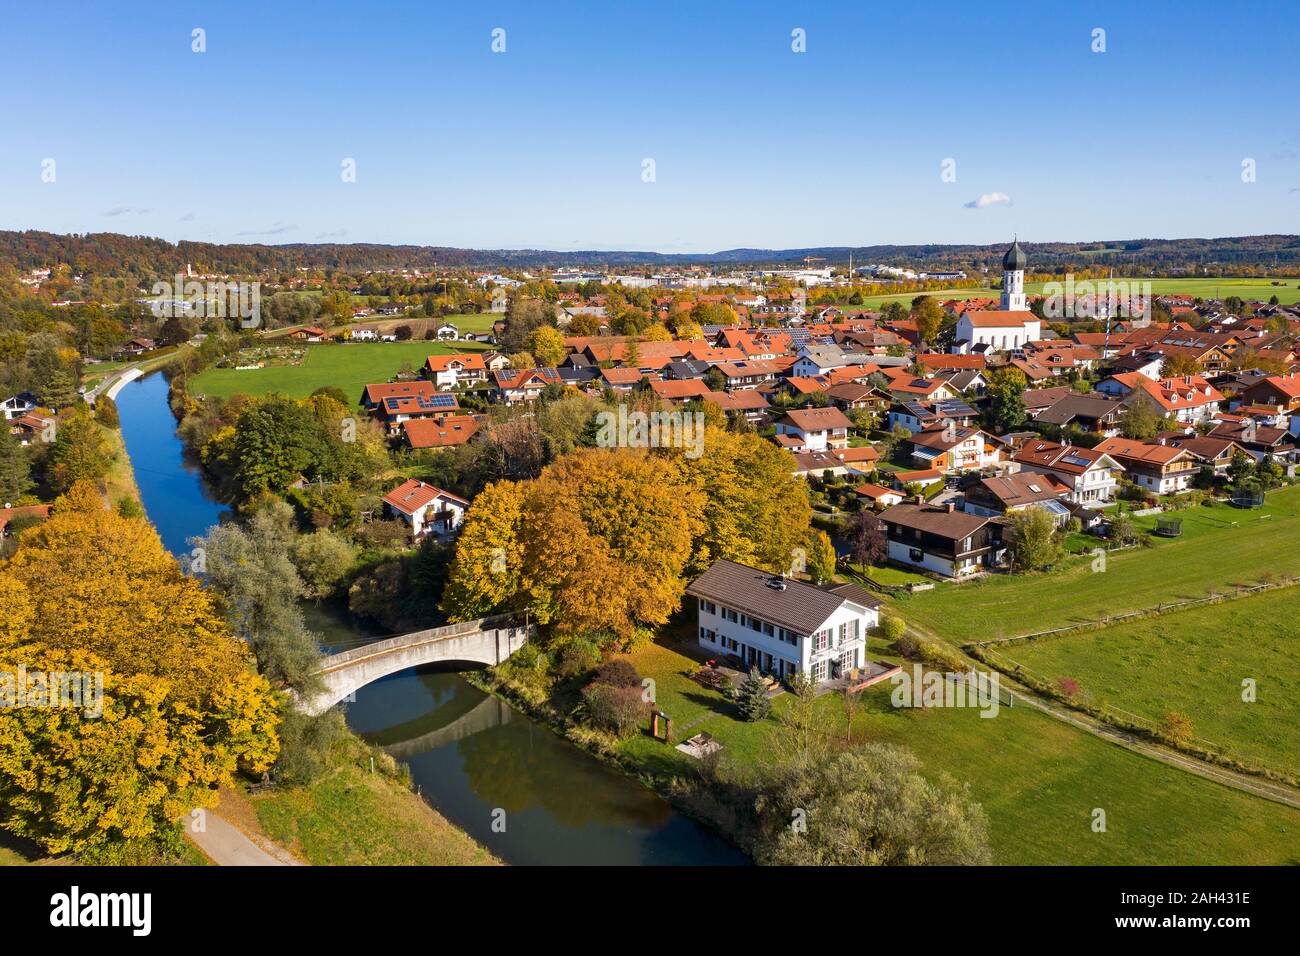 Germany, Bavaria, Geretsried, Aerial view of countryside town in autumn Stock Photo